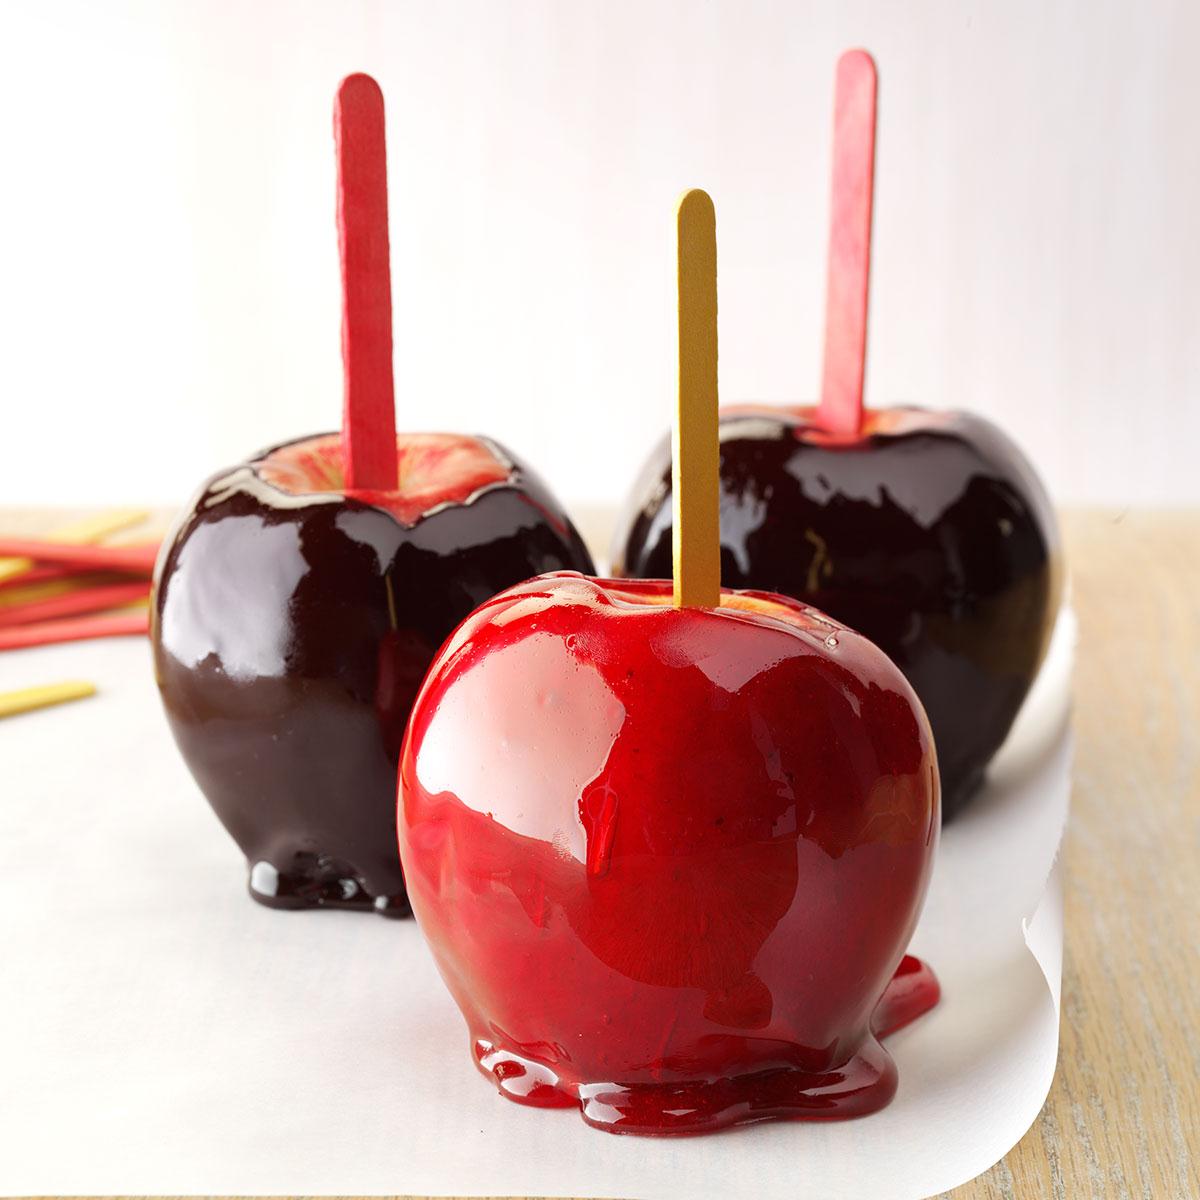 Black-Hearted Candy Apples Recipe: How to Make It